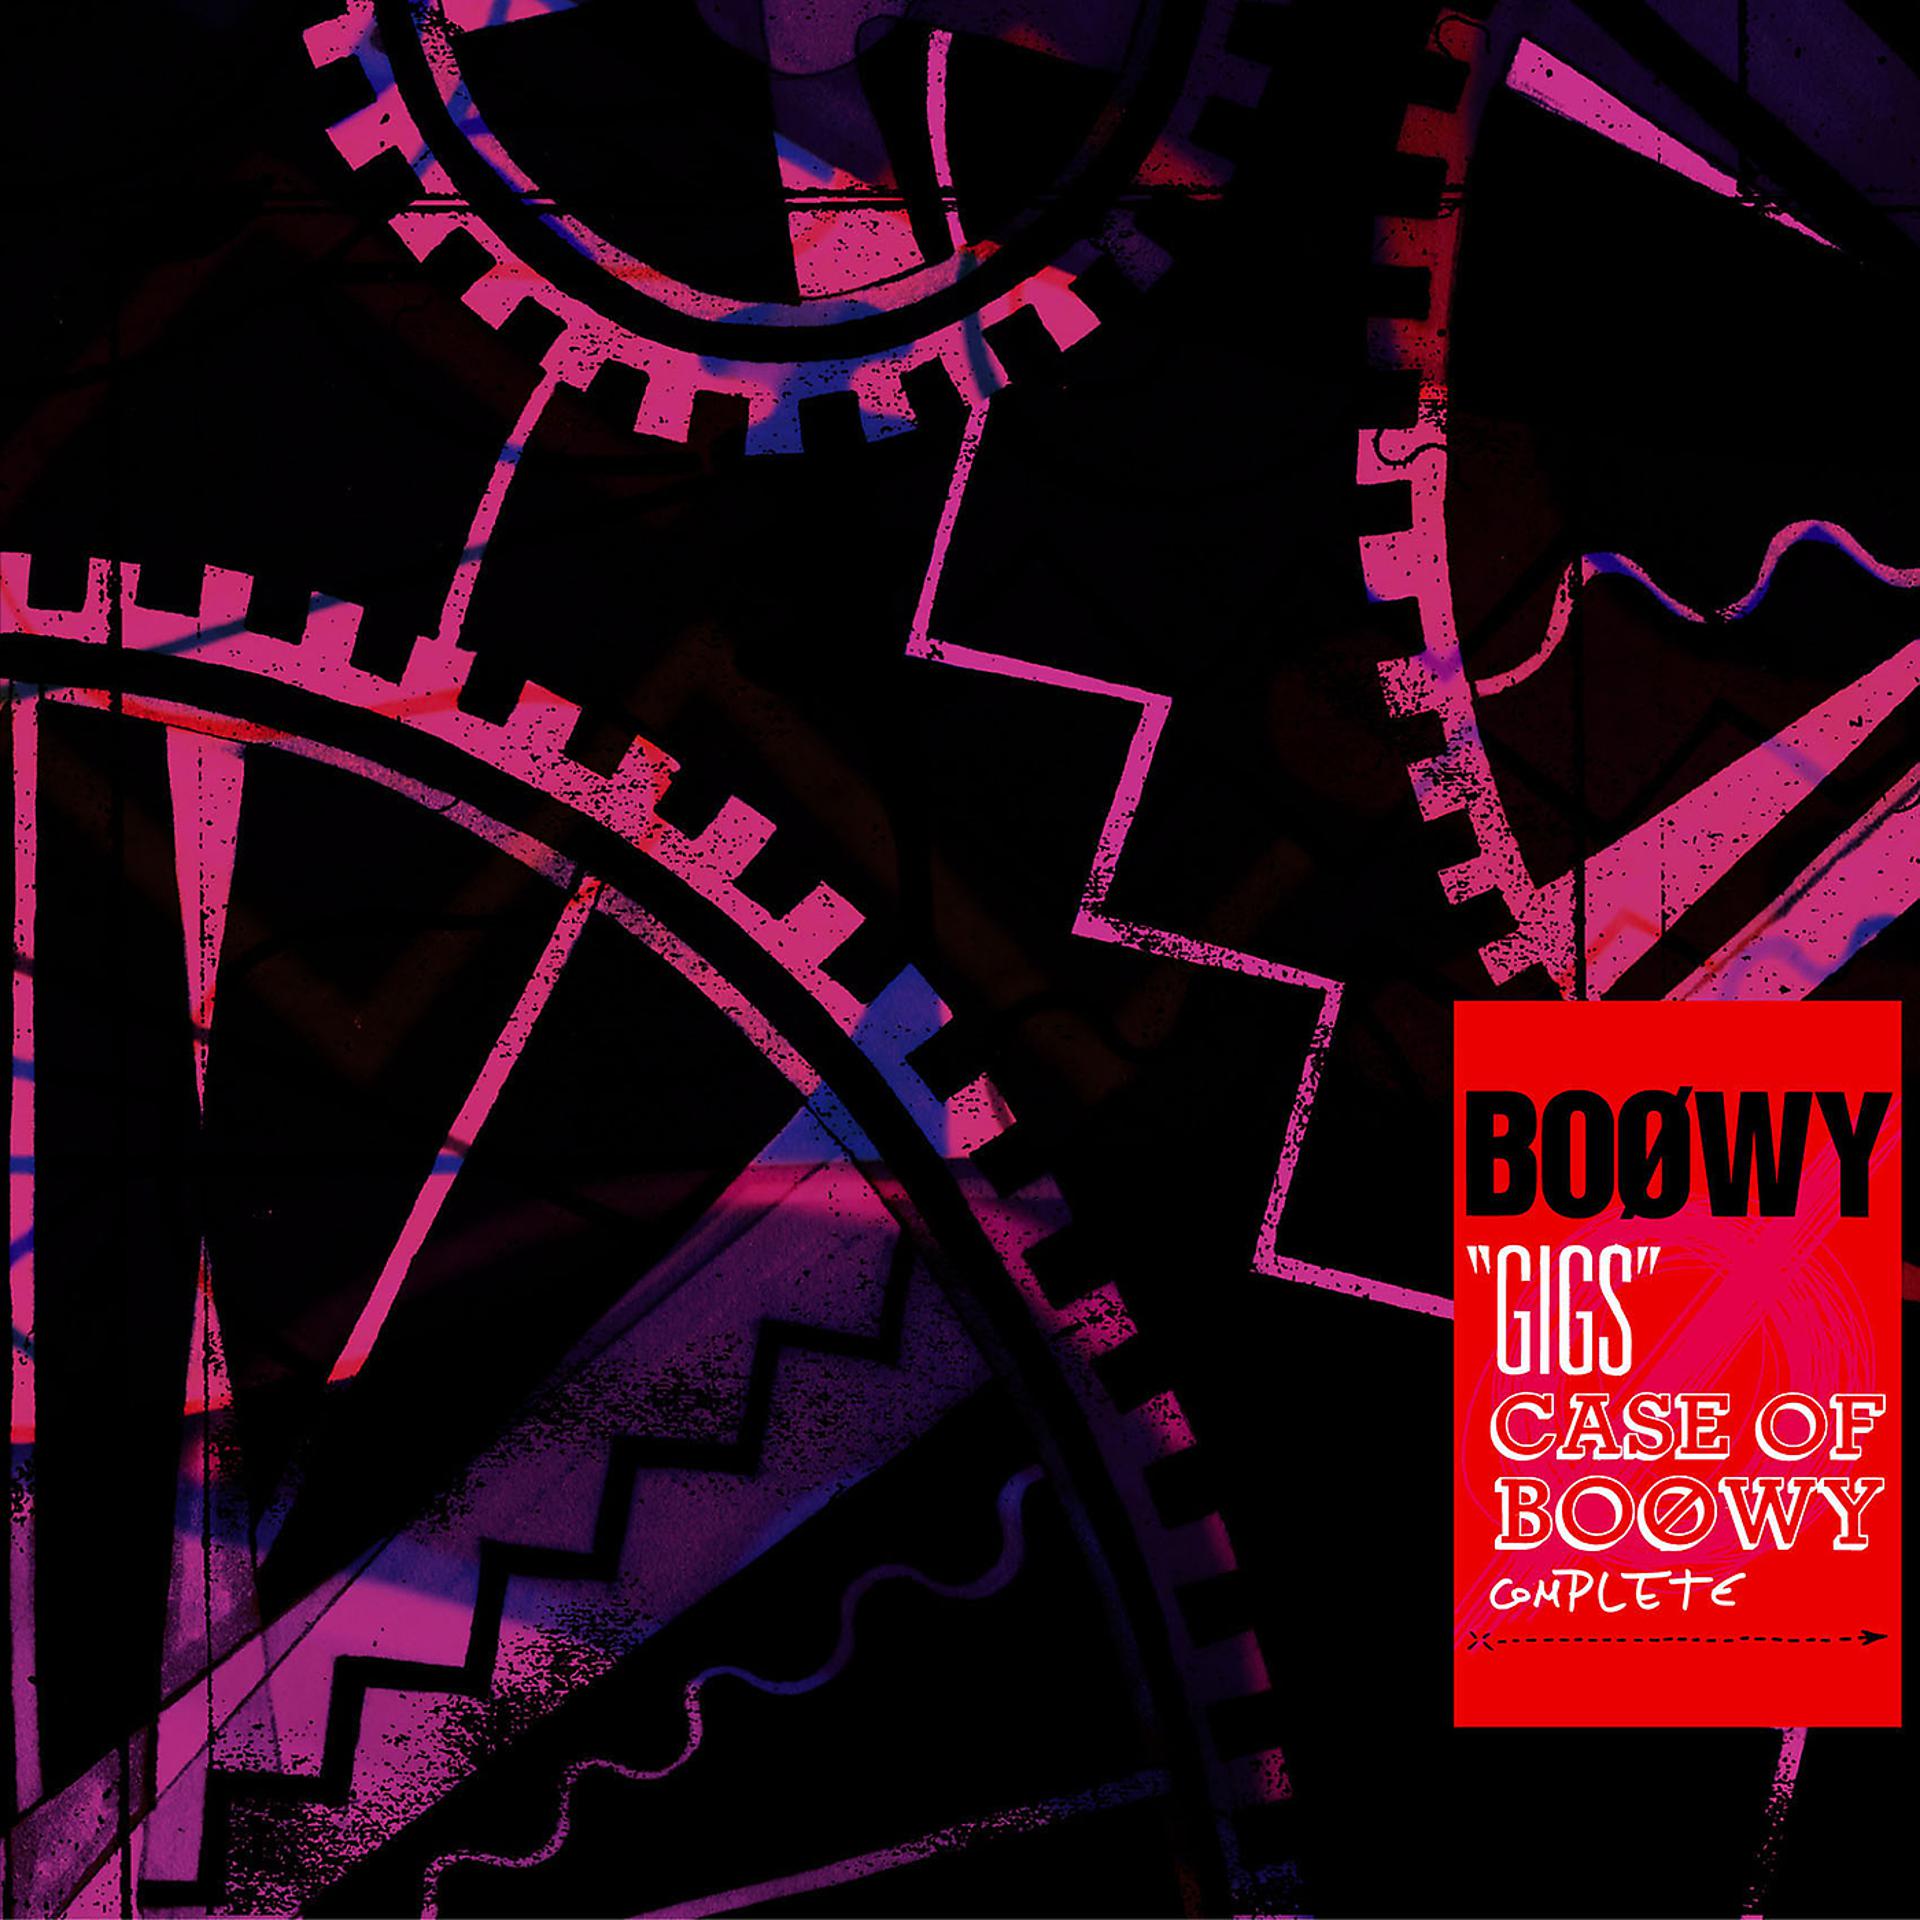 Постер альбома "Gigs" Case Of Boowy Complete